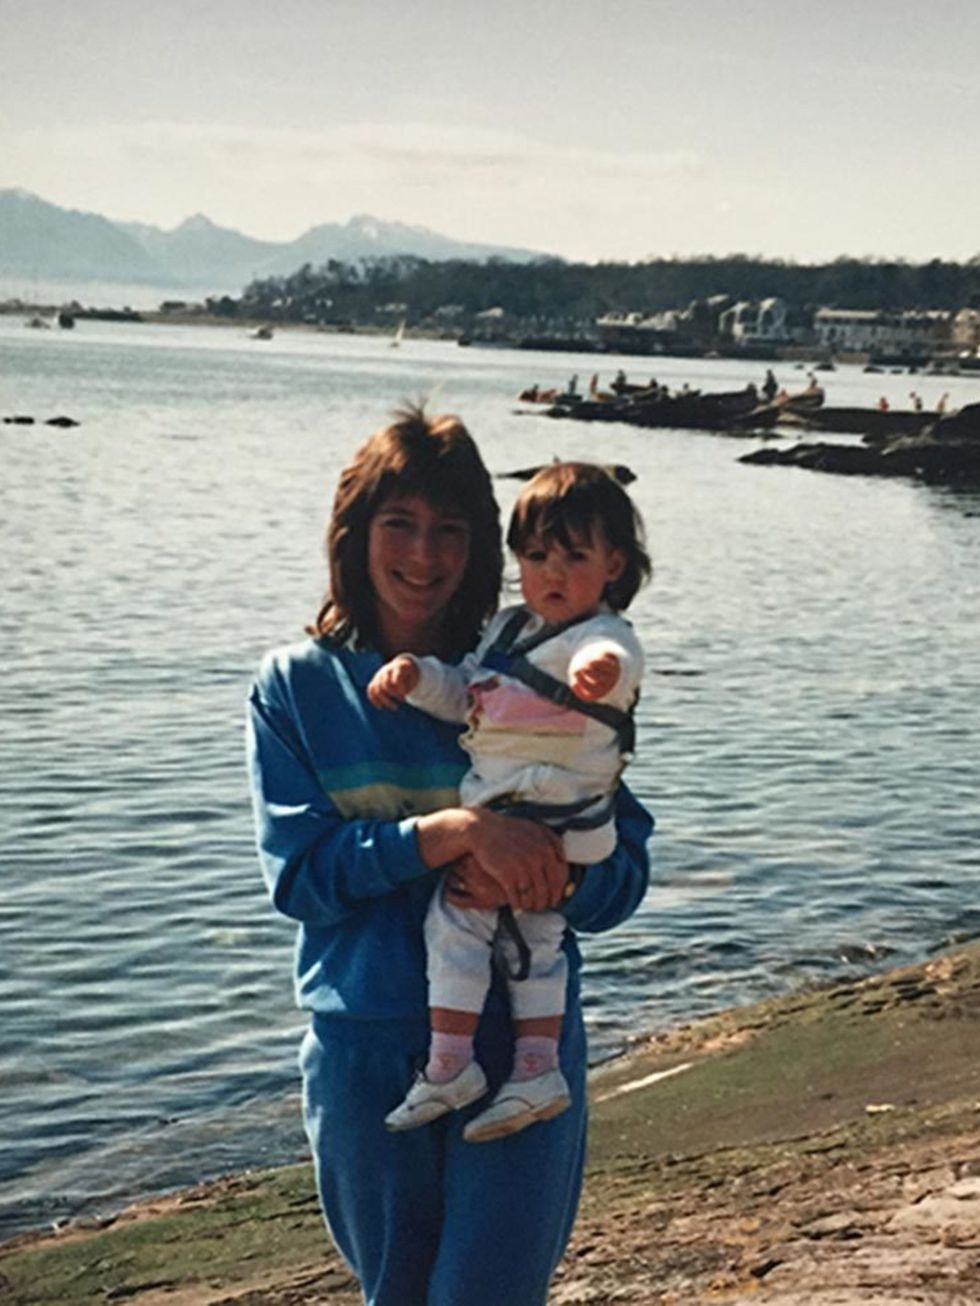 Debbie Morgan, Editorial Business Manager

Mum and I summer-holidaying in Millport